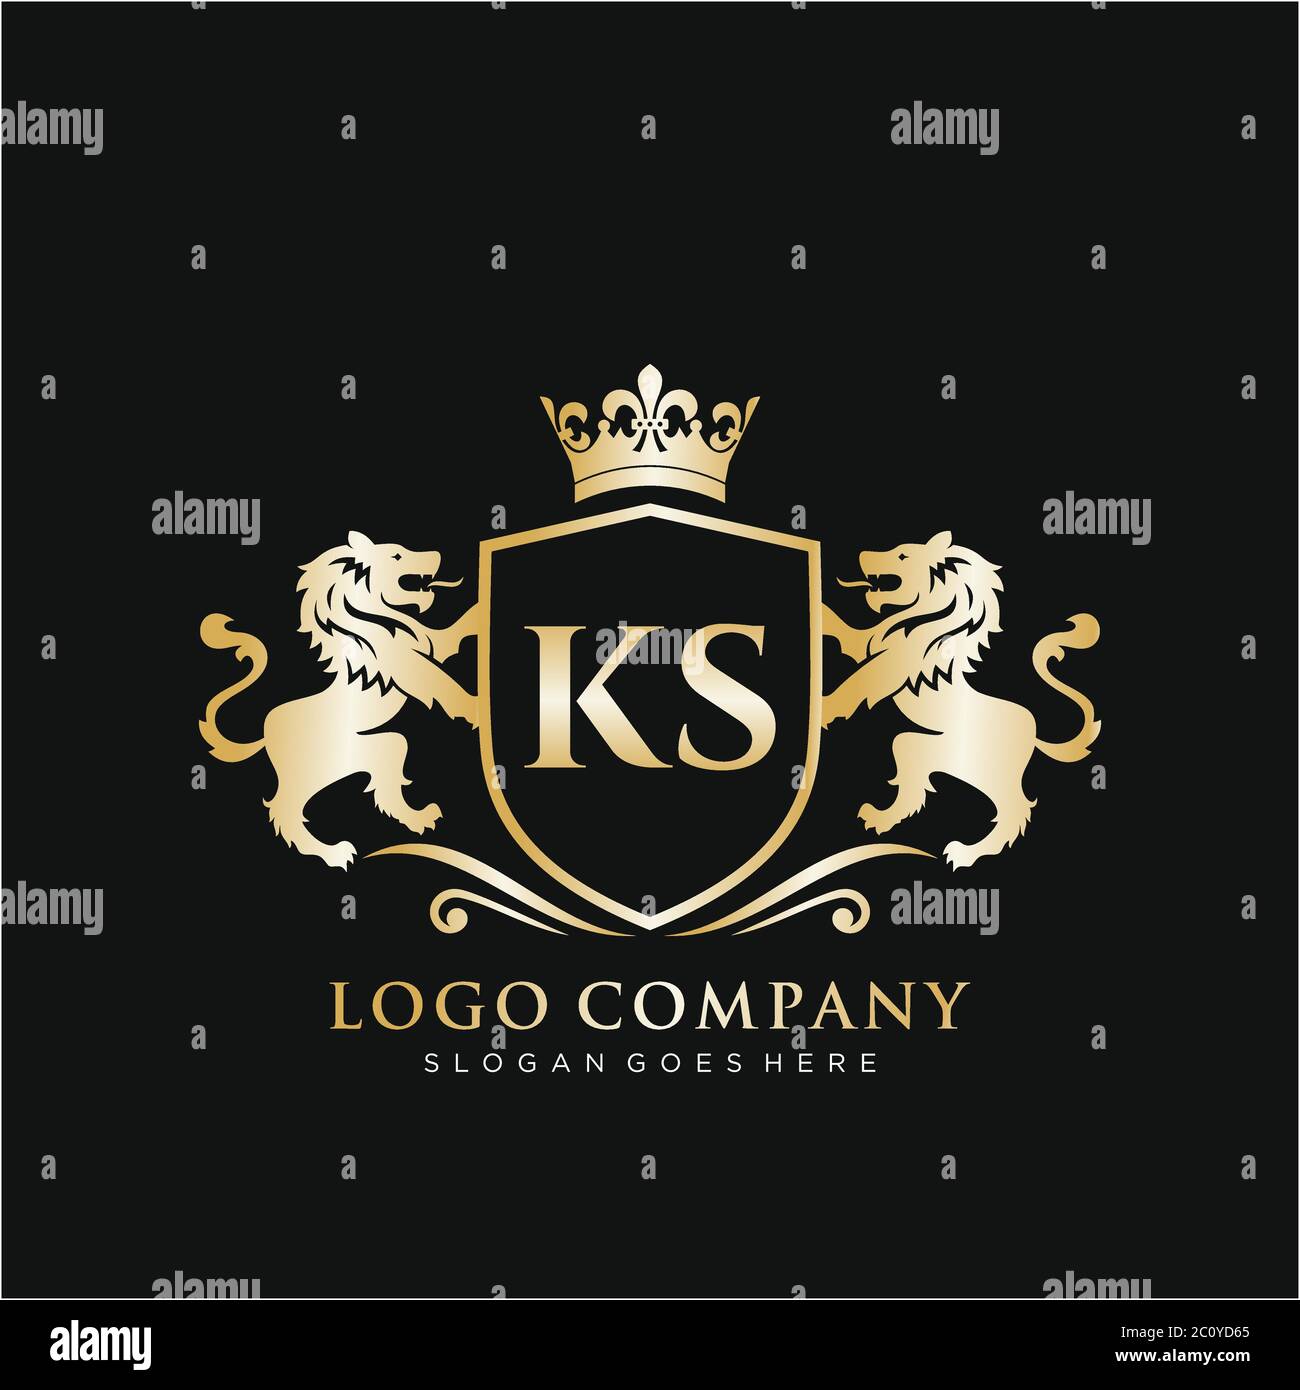 Ks Letter Initial With Lion Royal Logo Template Stock Vector Image Art Alamy